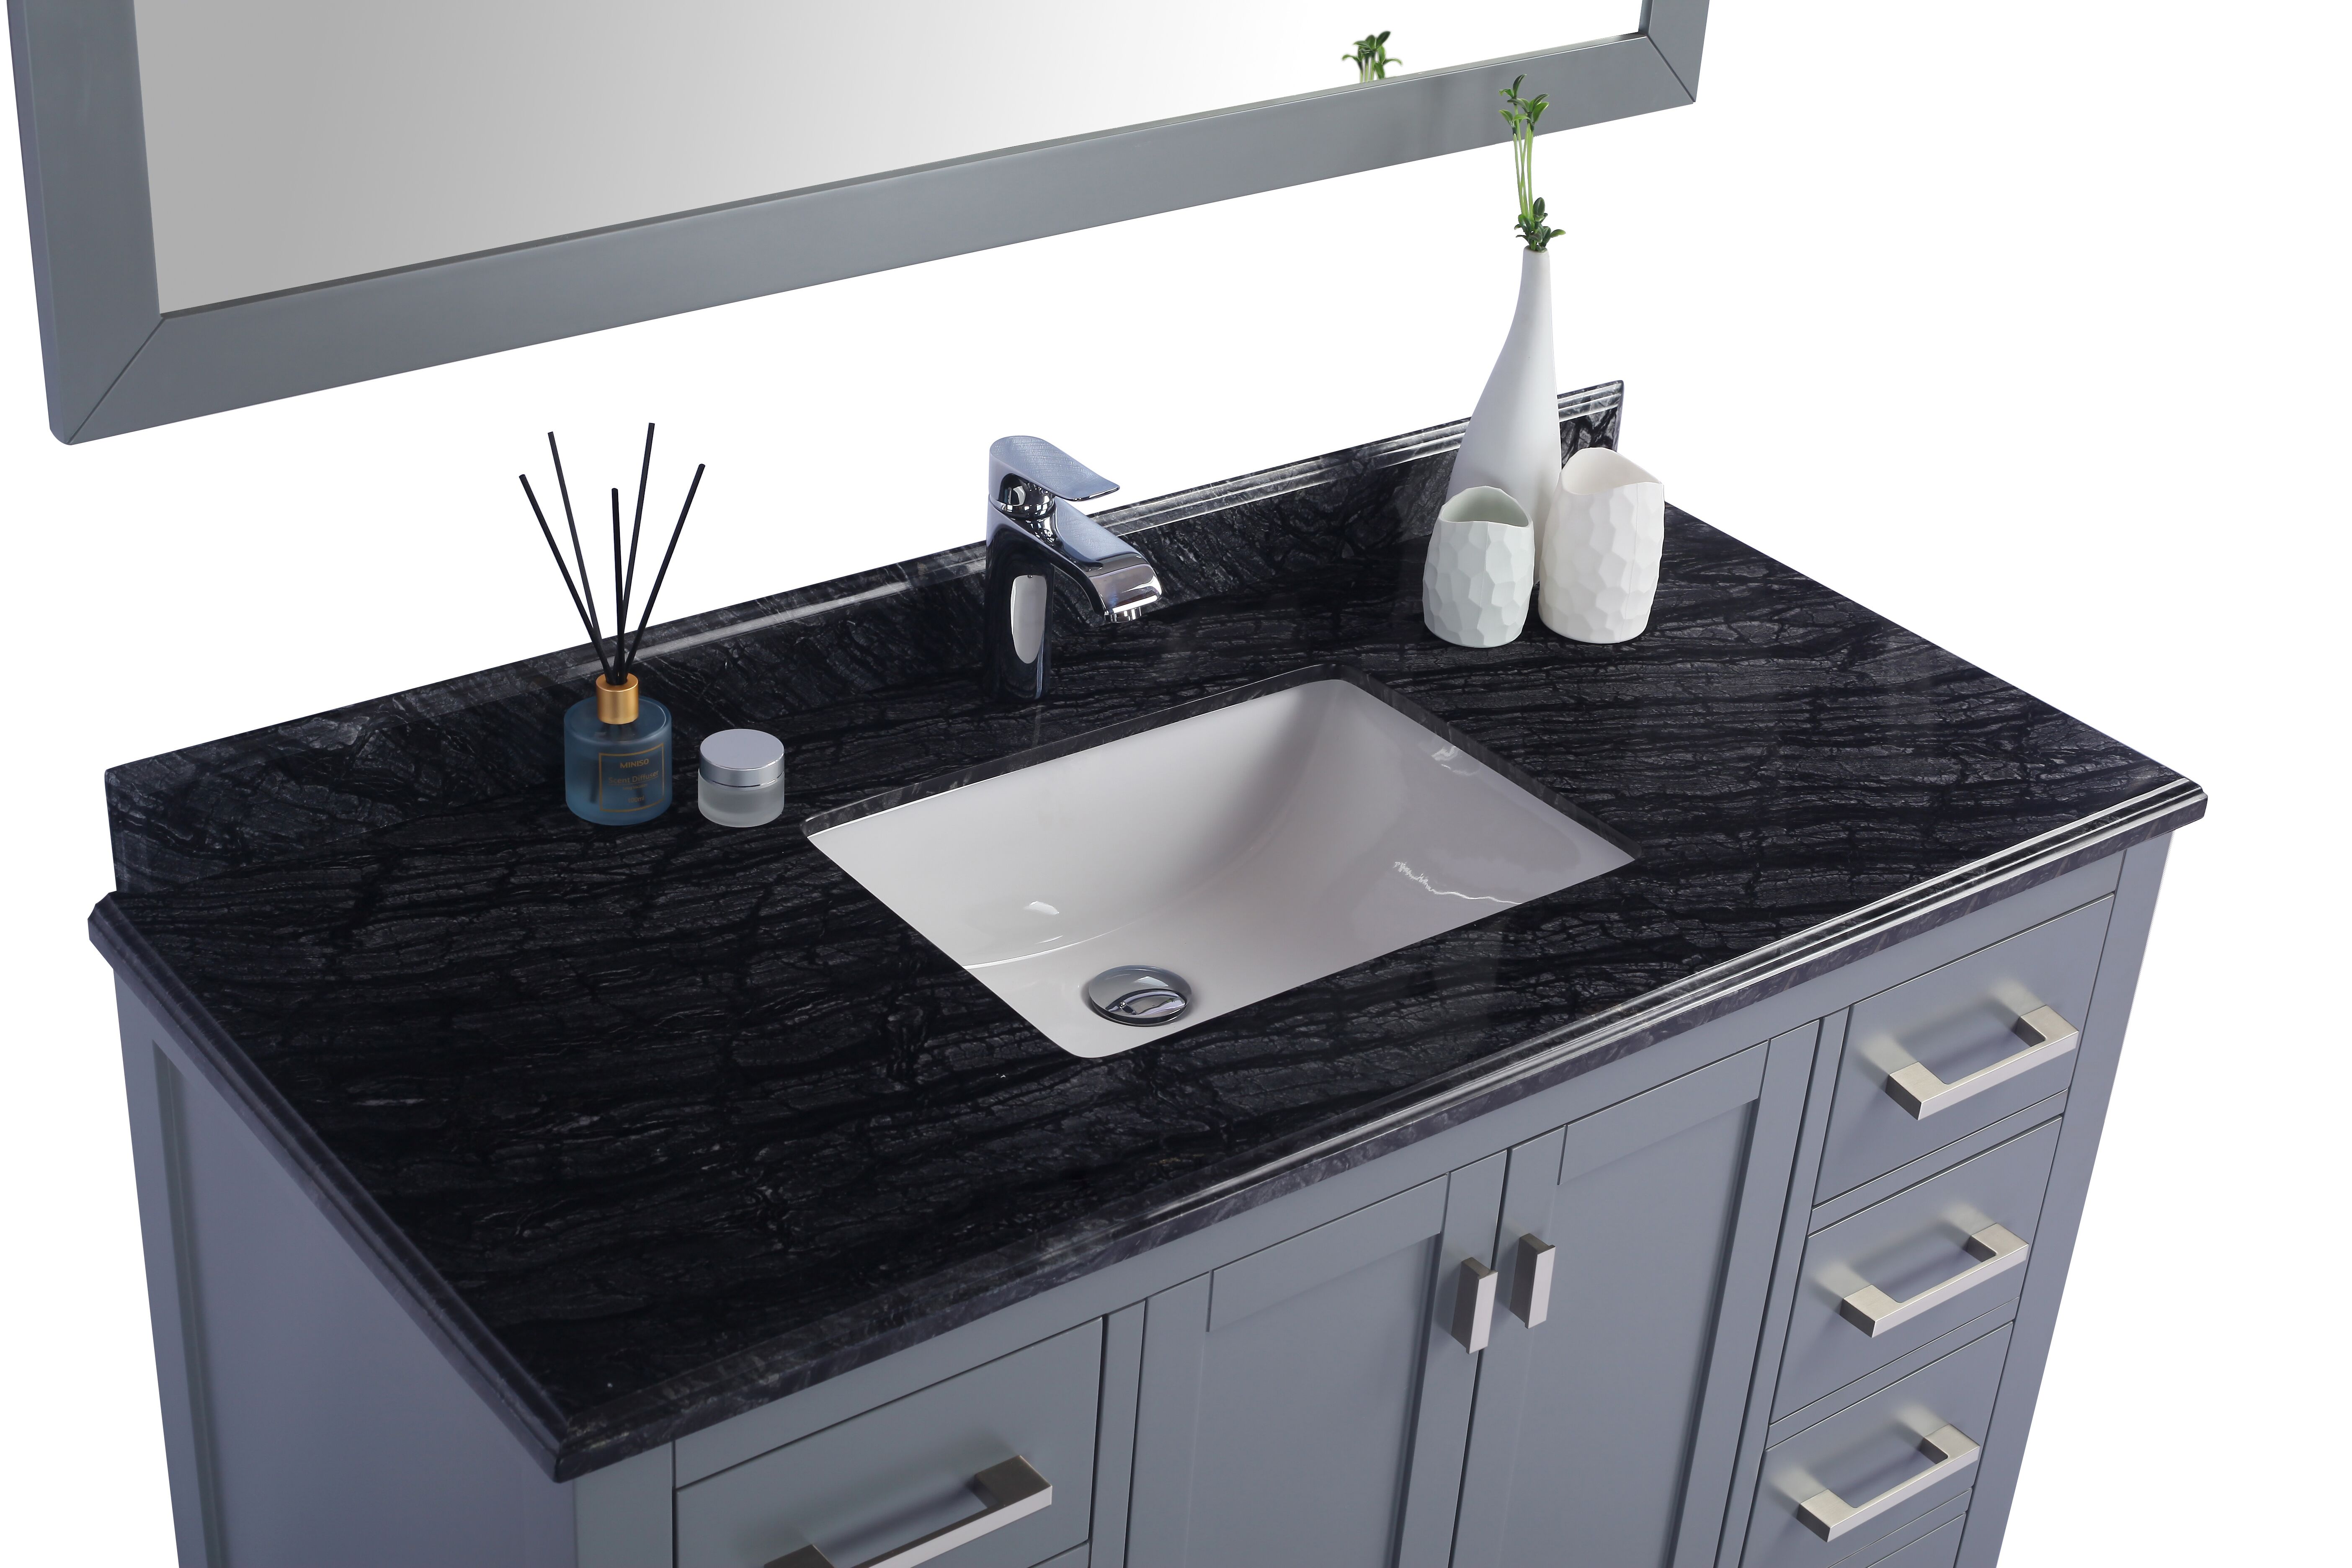 48" Single Sink Bathroom Vanity Cabinet + Top and Color Options